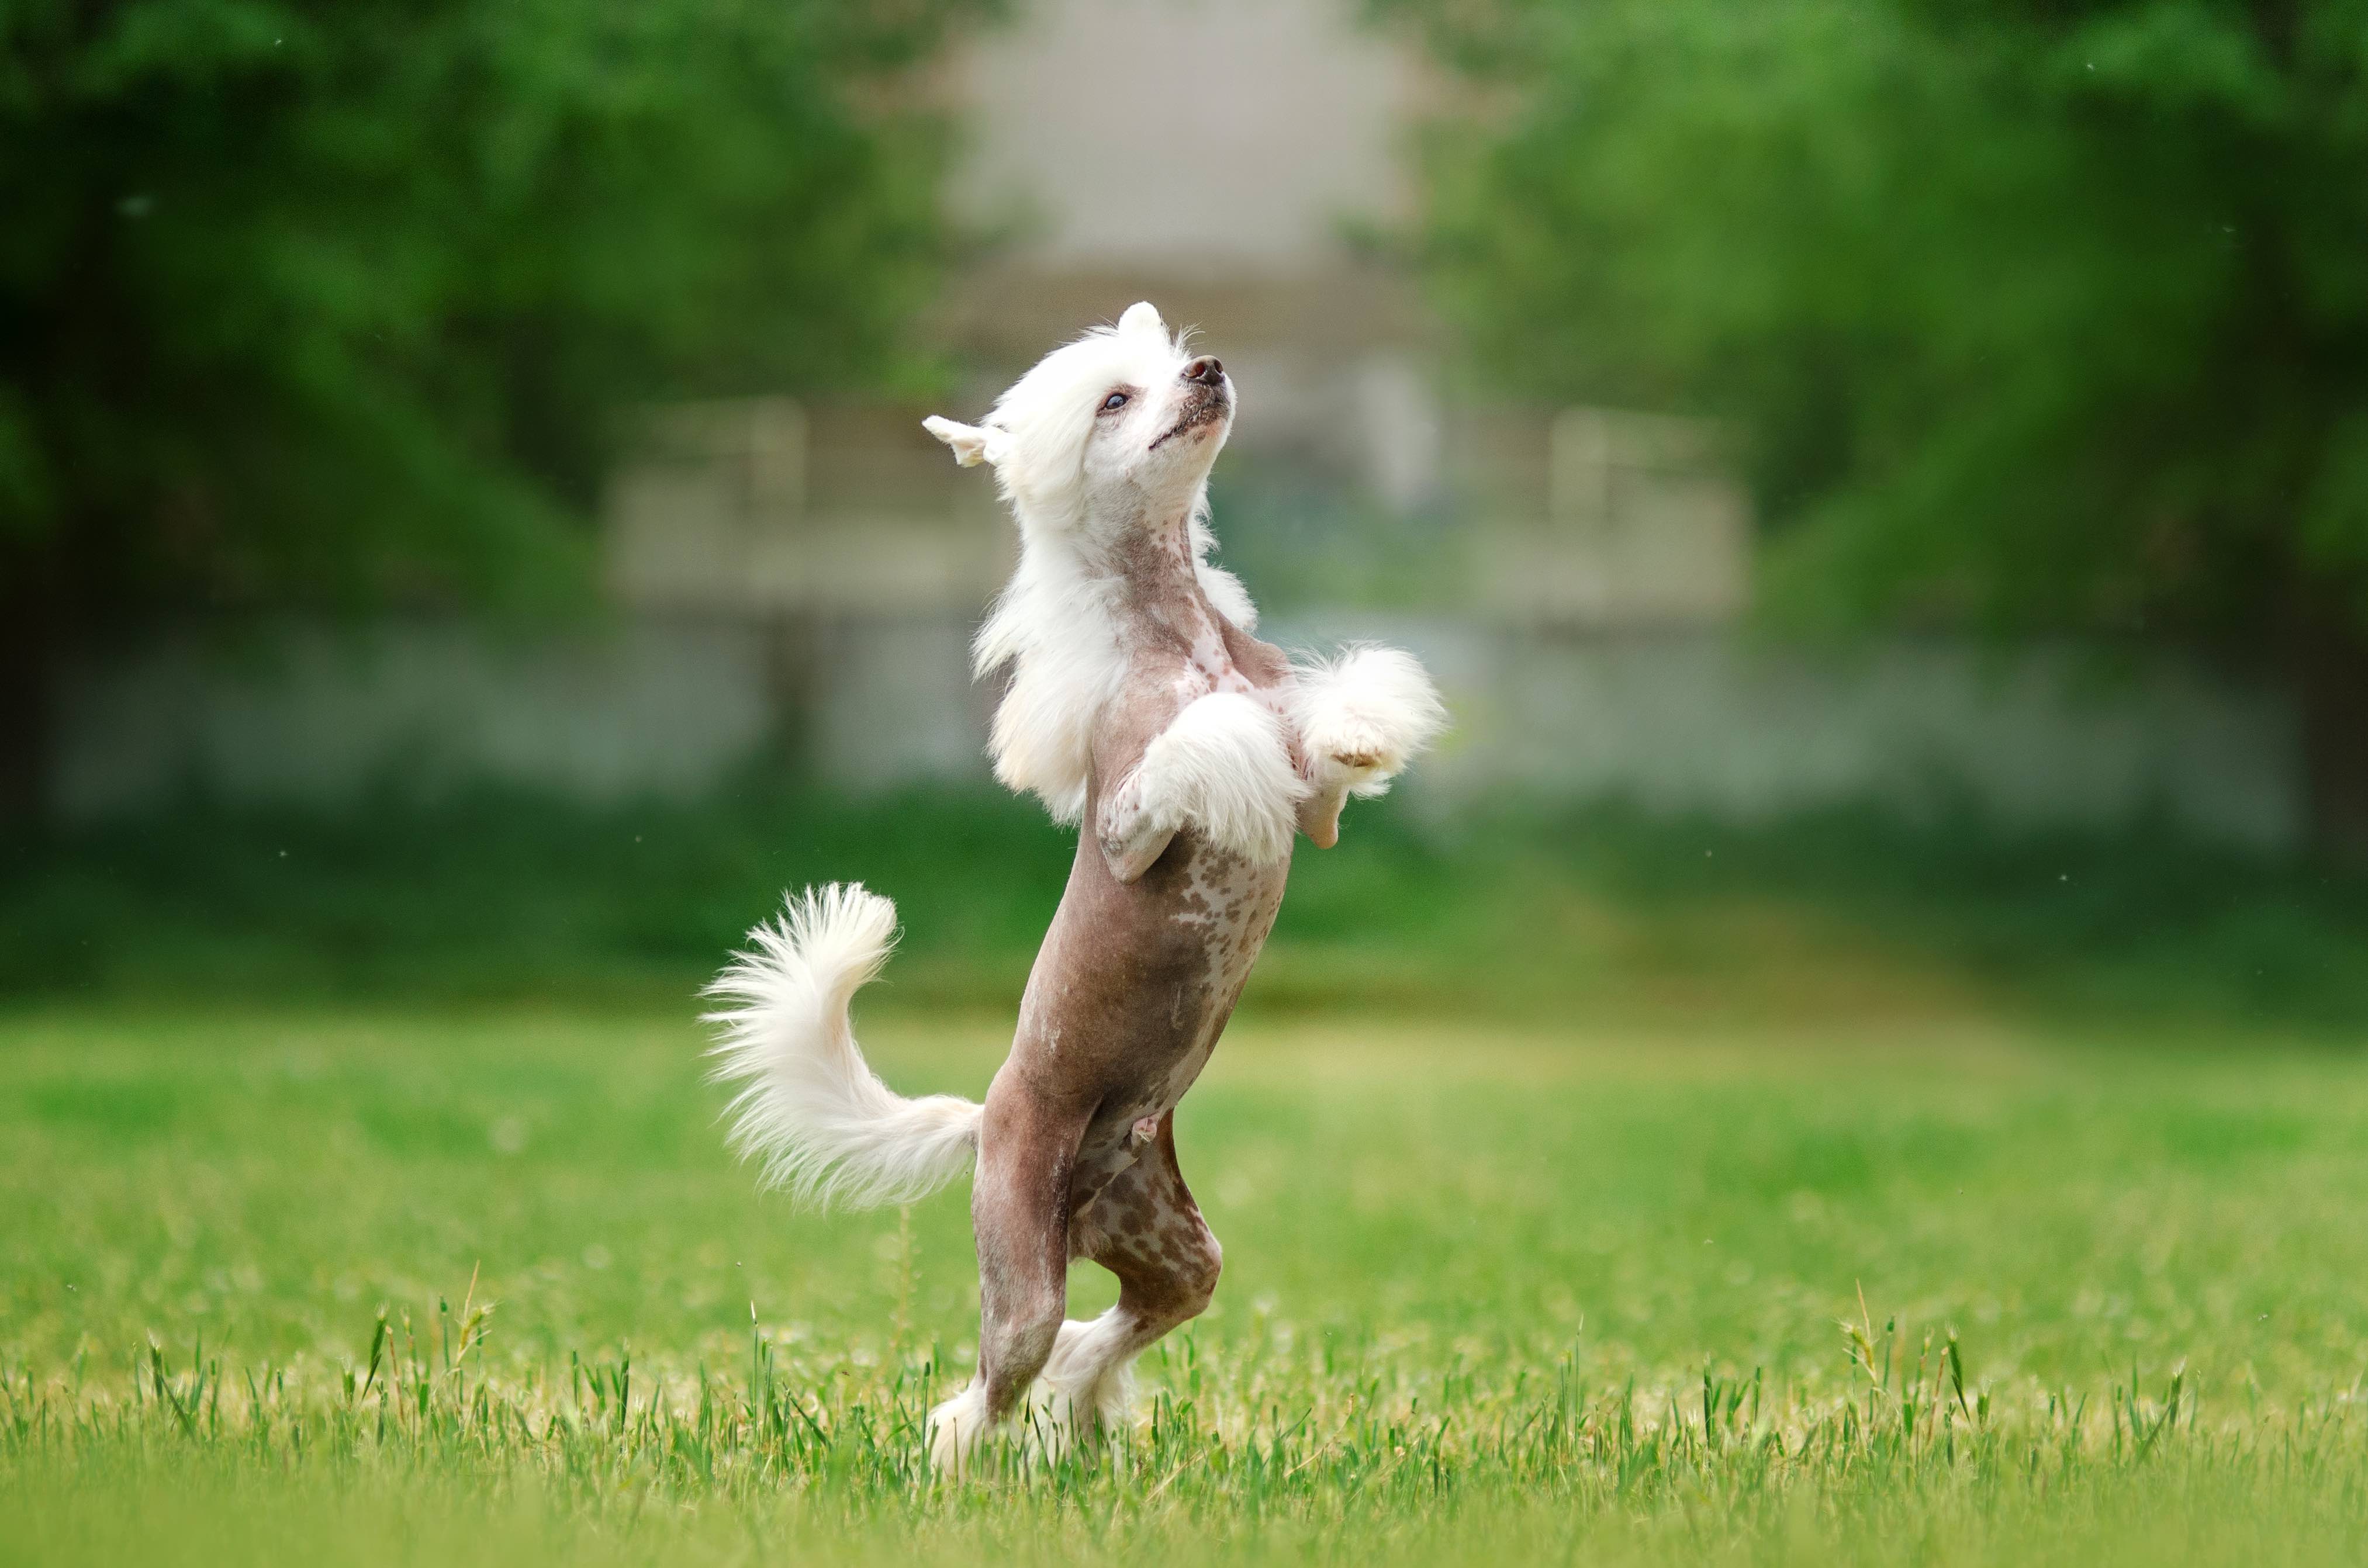 hairless chinese crested dog standing on its hind legs in grass